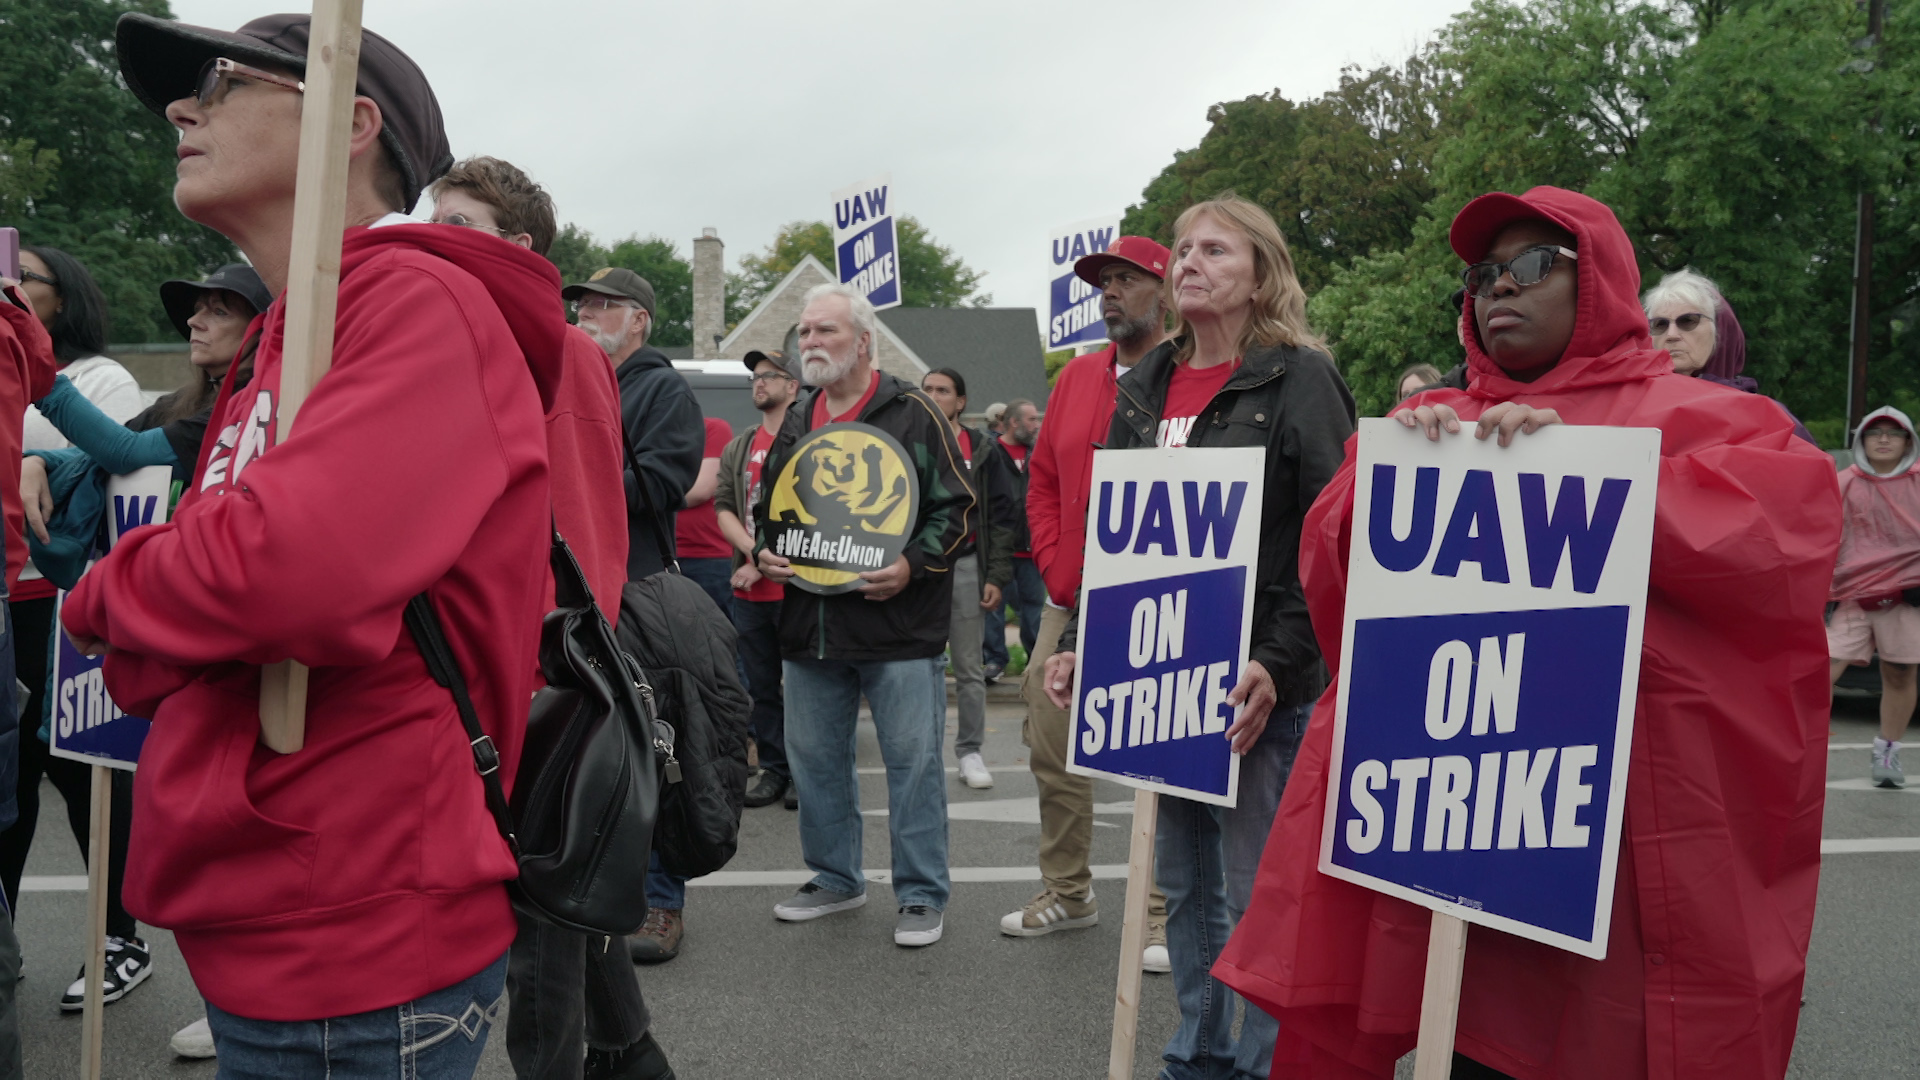 A group of people wearing ponchos and raincoats and holding signs reading "UAW On Strike" stand outside and face the same direction while listening to a speaker, with a house and trees in the background.